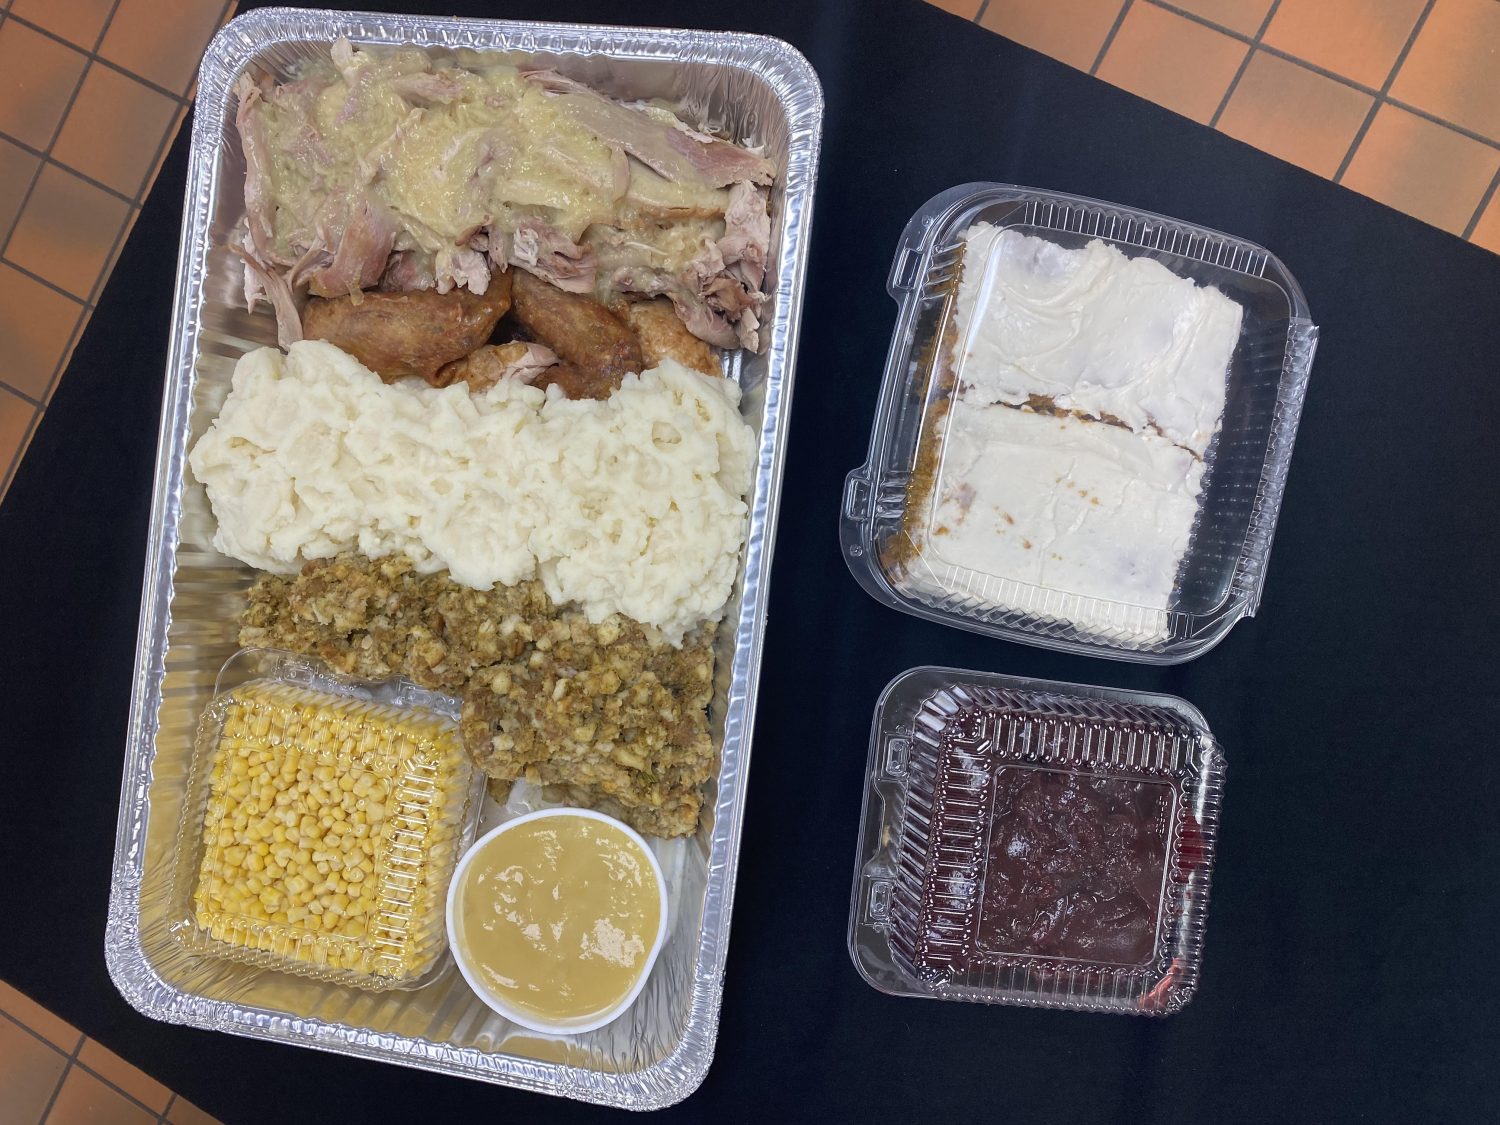 Taher and MAPS prepare, donate, and deliver five Thanksgiving feasts